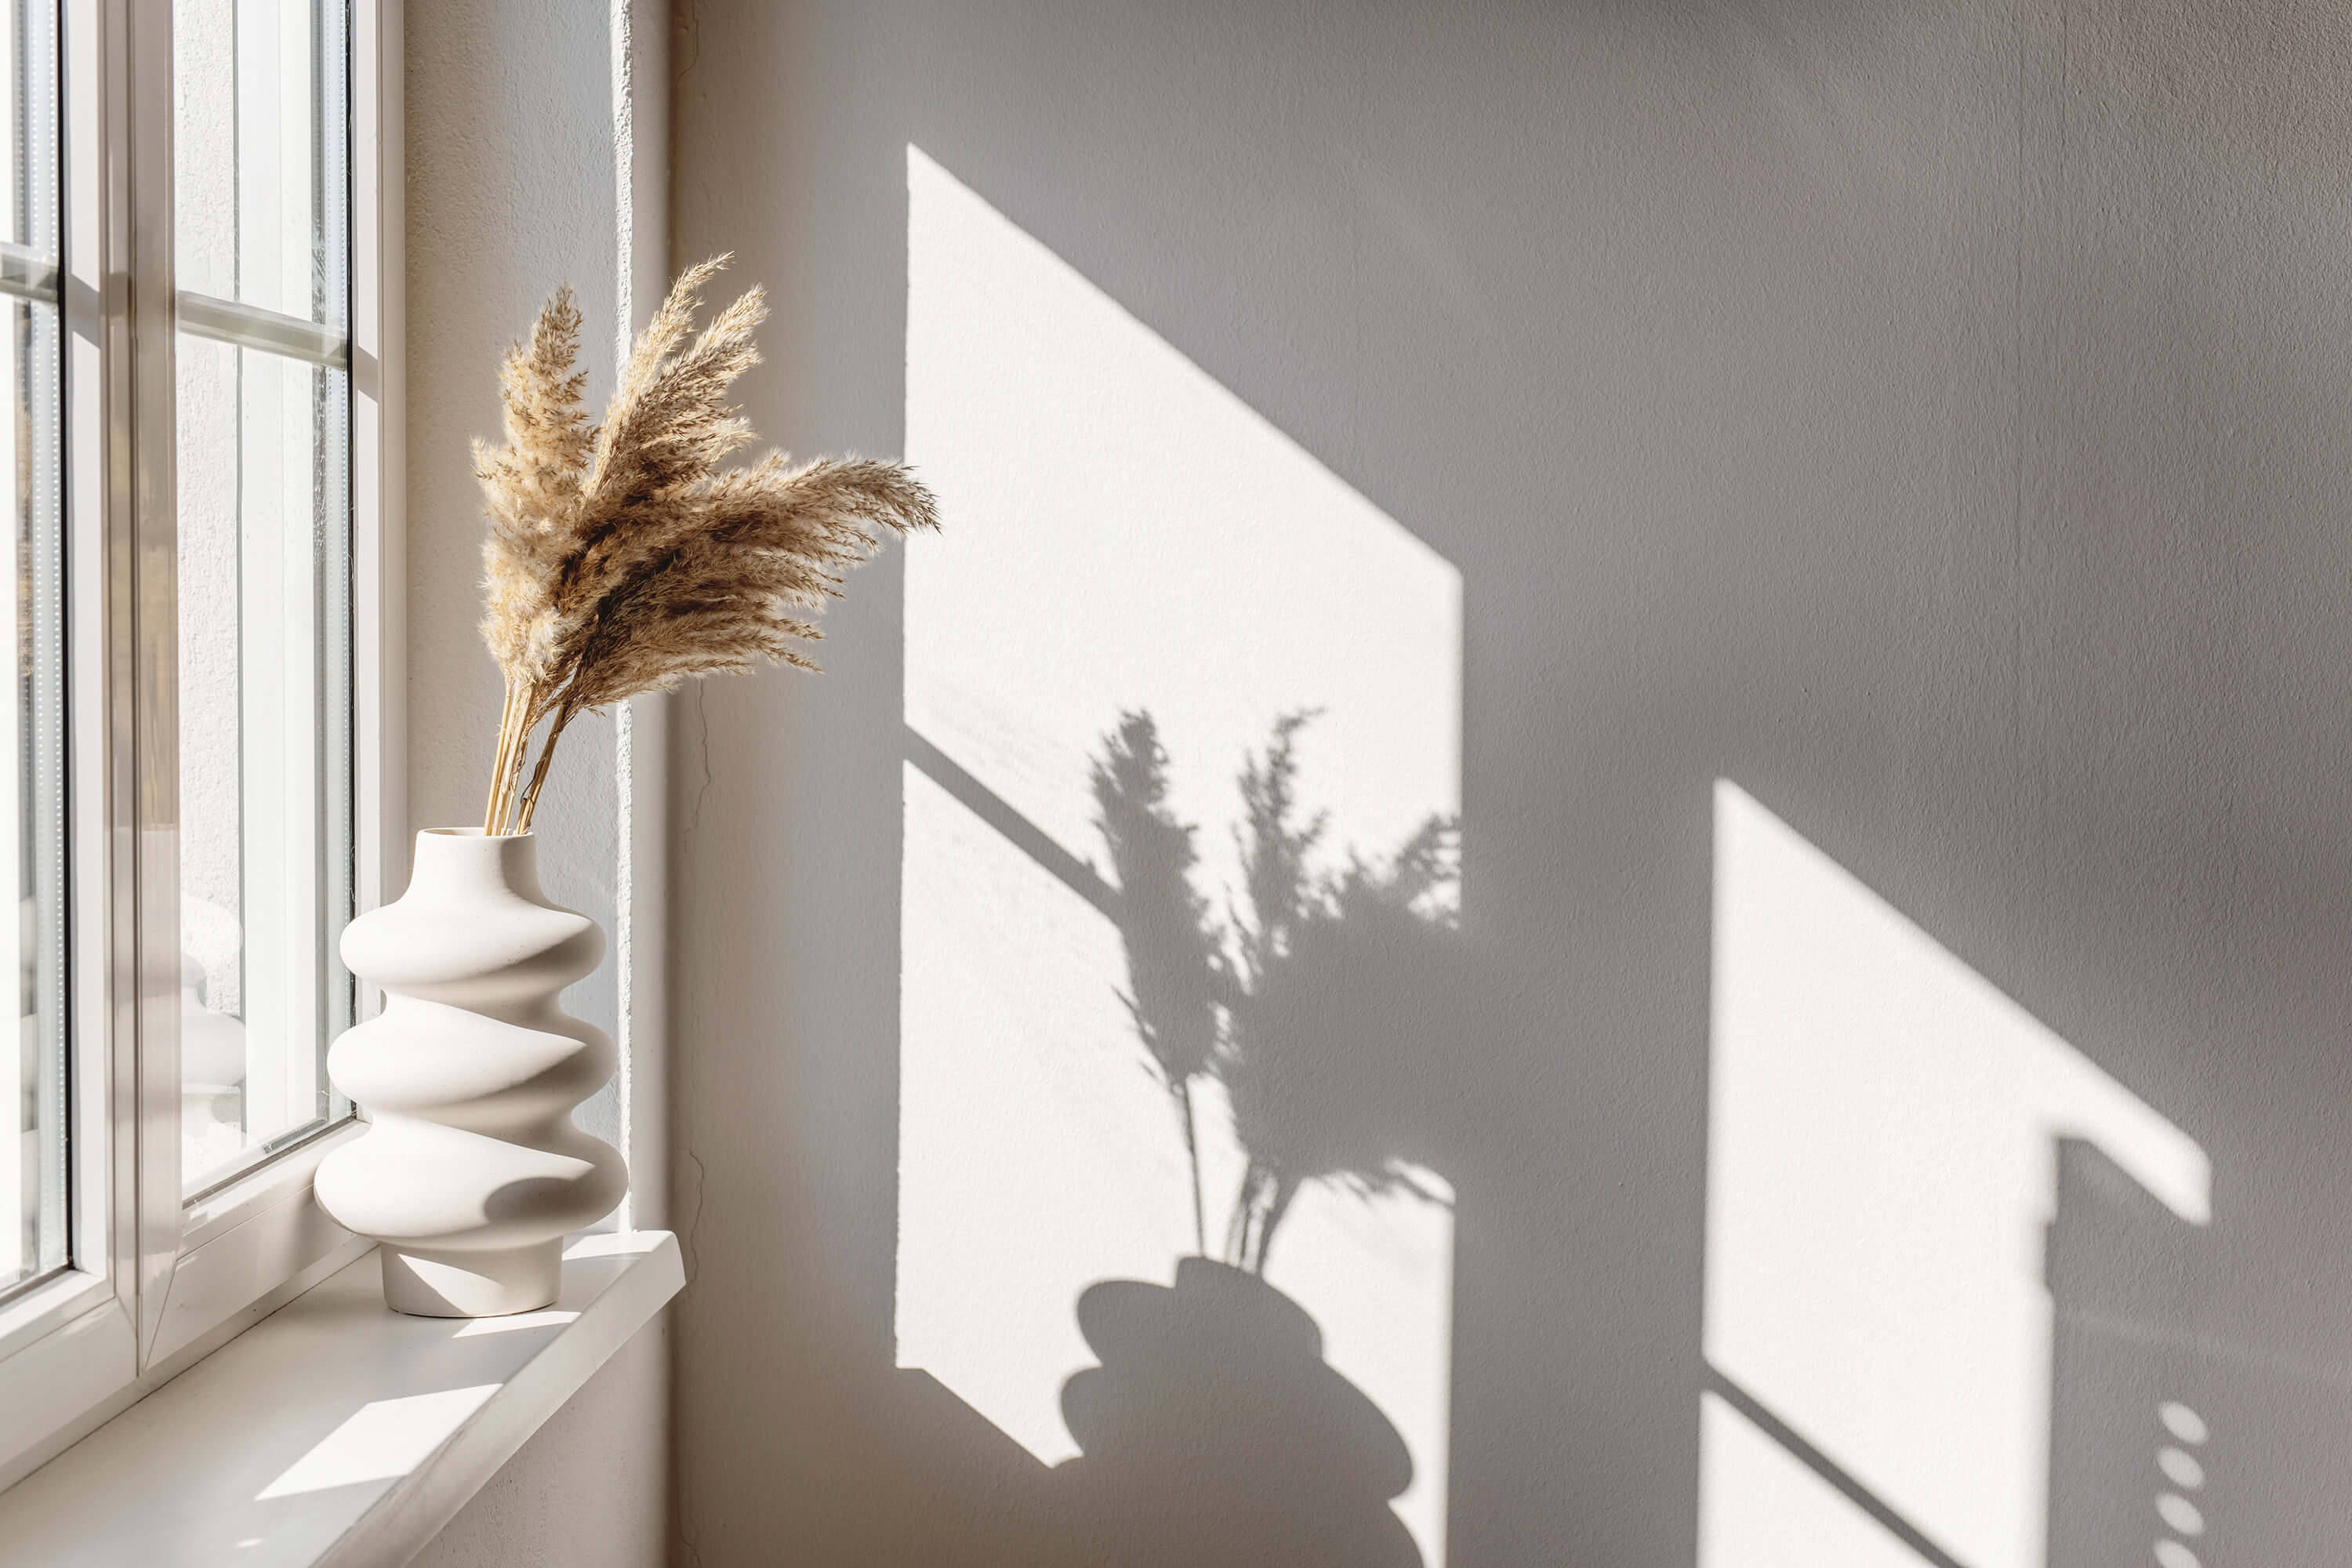 Shadow of a vase and feathered flowers sitting on a windowsill